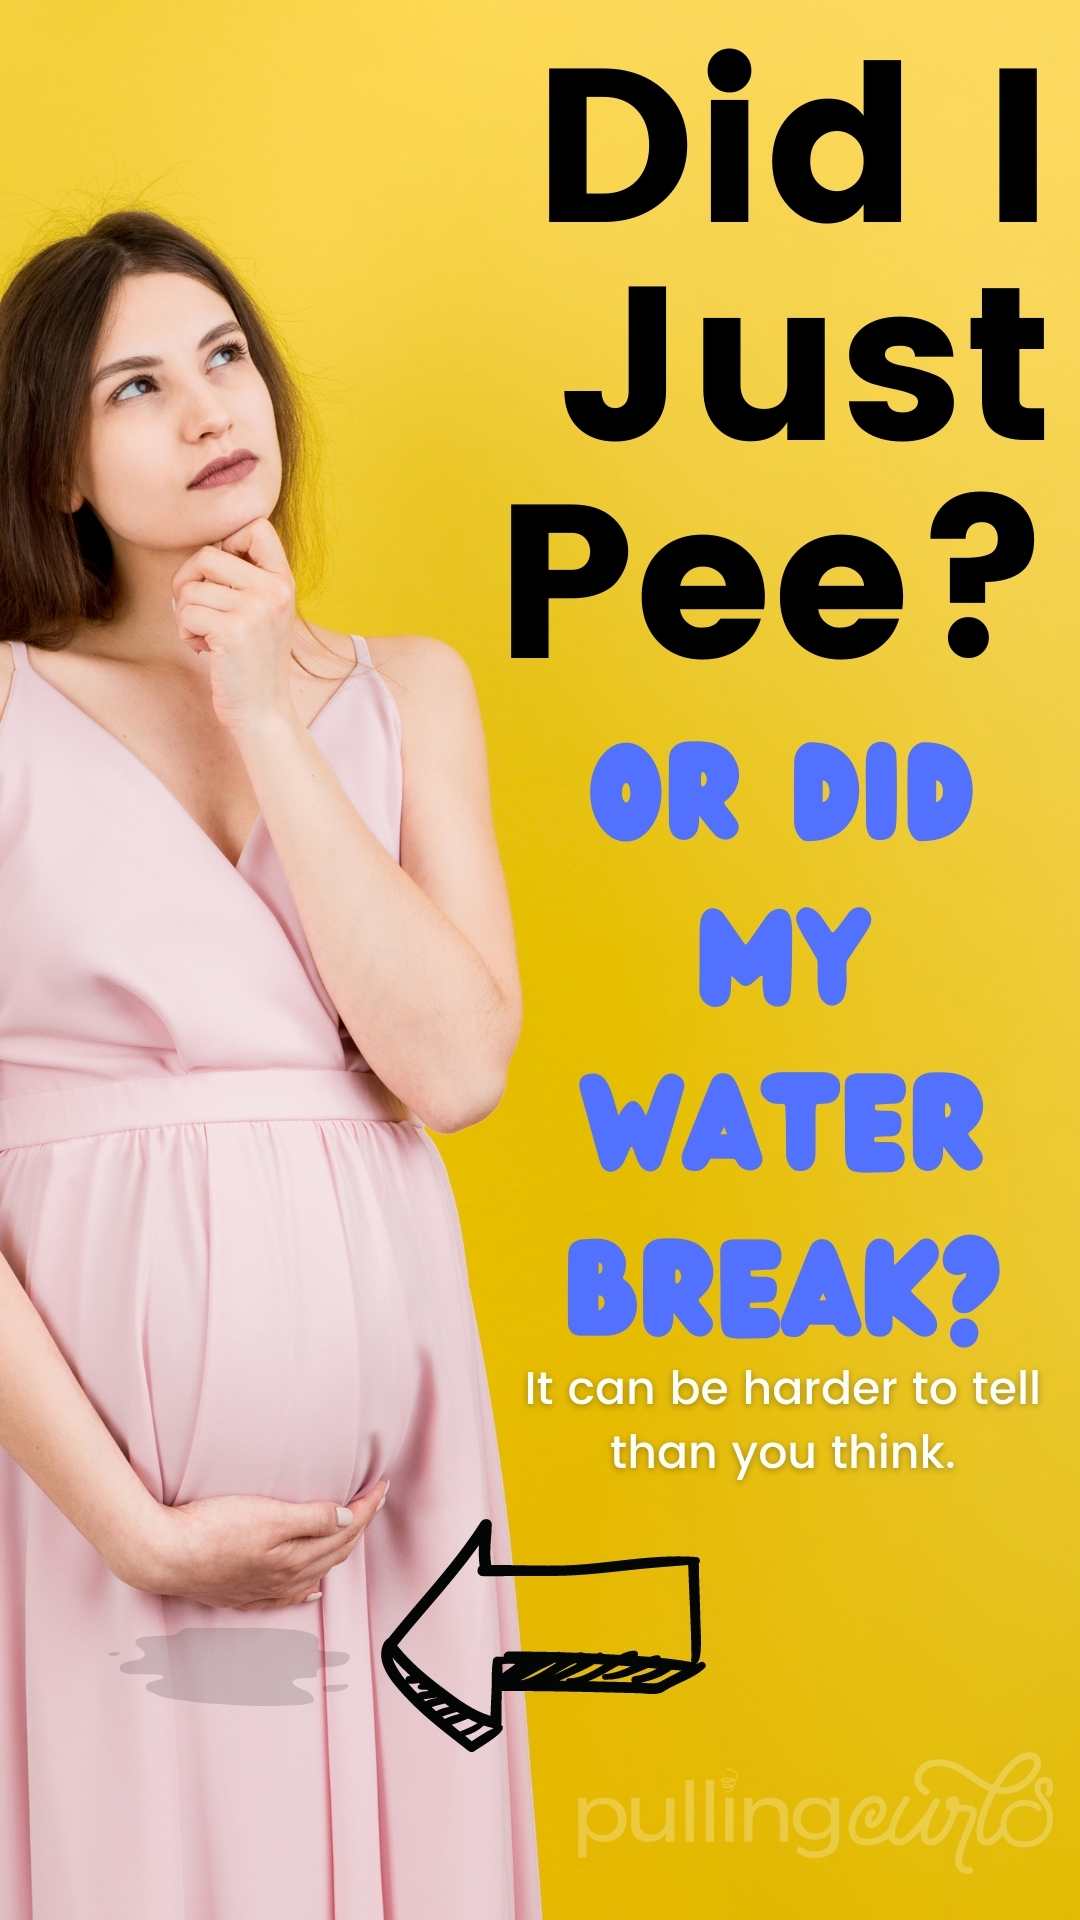 This Is my Water Broken Quiz will help you figure out if your amniotic sac broke or if you just peed... even with or without contractions. It can be really hard to tell if your waters are leaking... We'll talk about how long it can be before baby needs to get out, and how often it happens? Plus, what does water breaking look like? via @pullingcurls